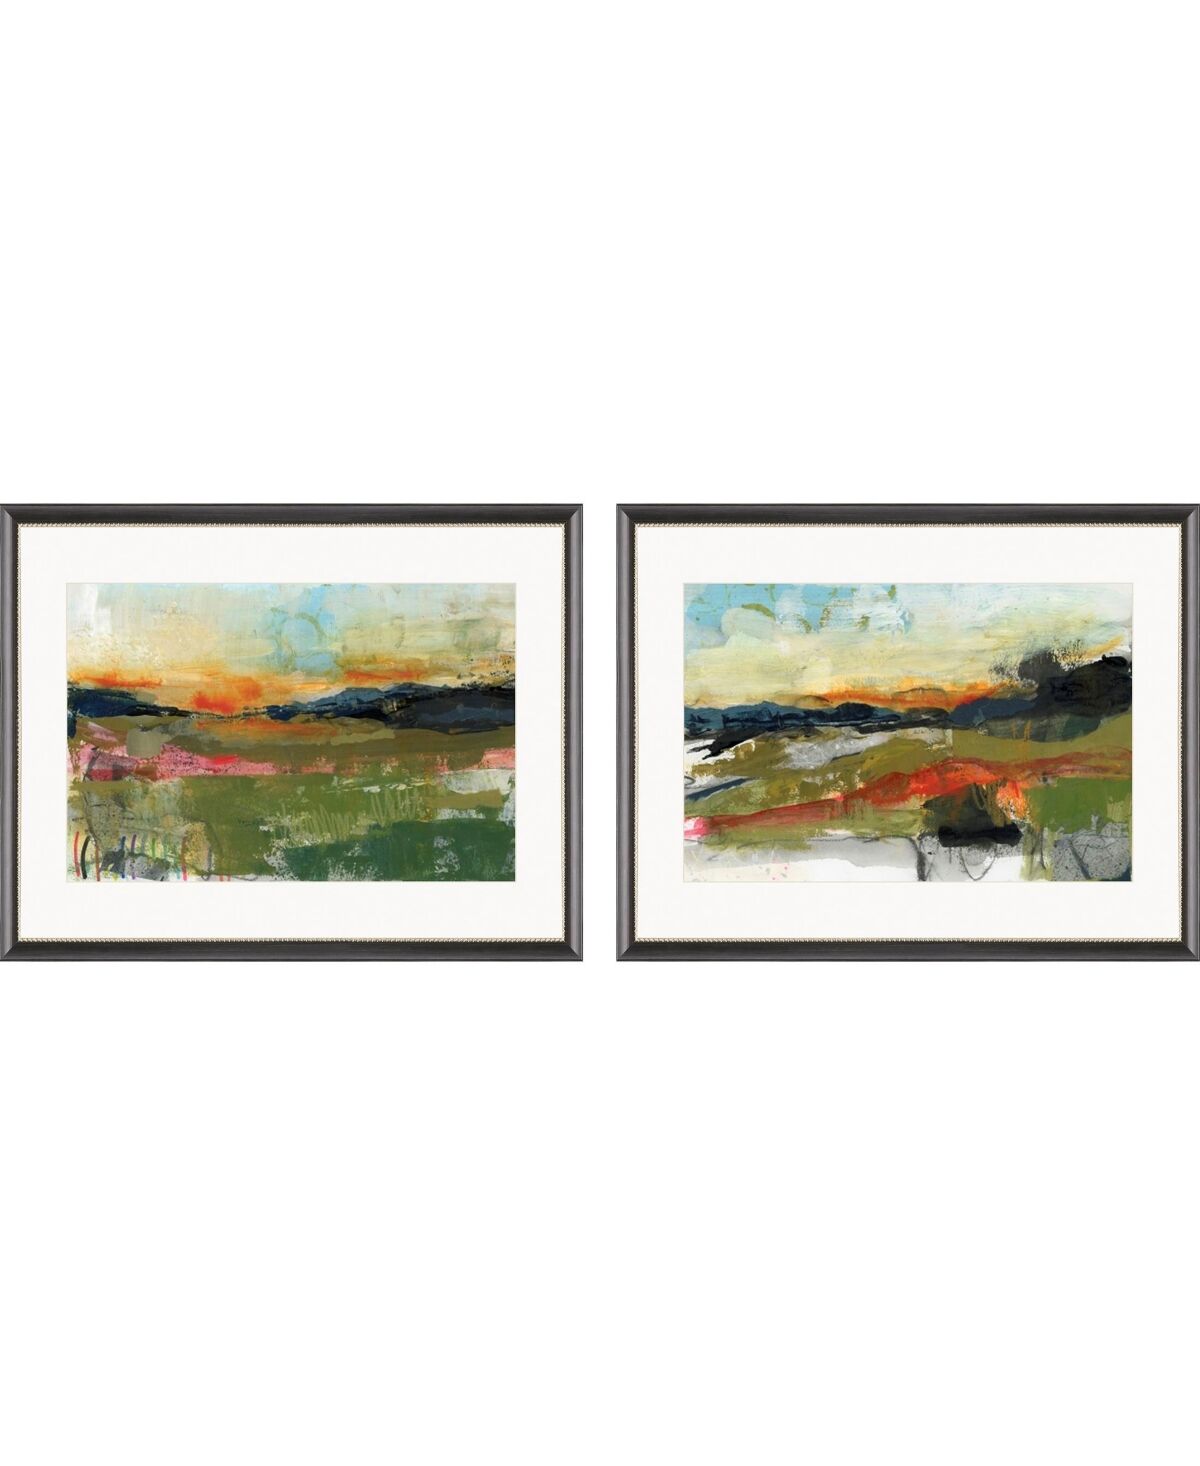 Paragon Picture Gallery Long Way Home Ii Framed Art, Set of 2 - Green